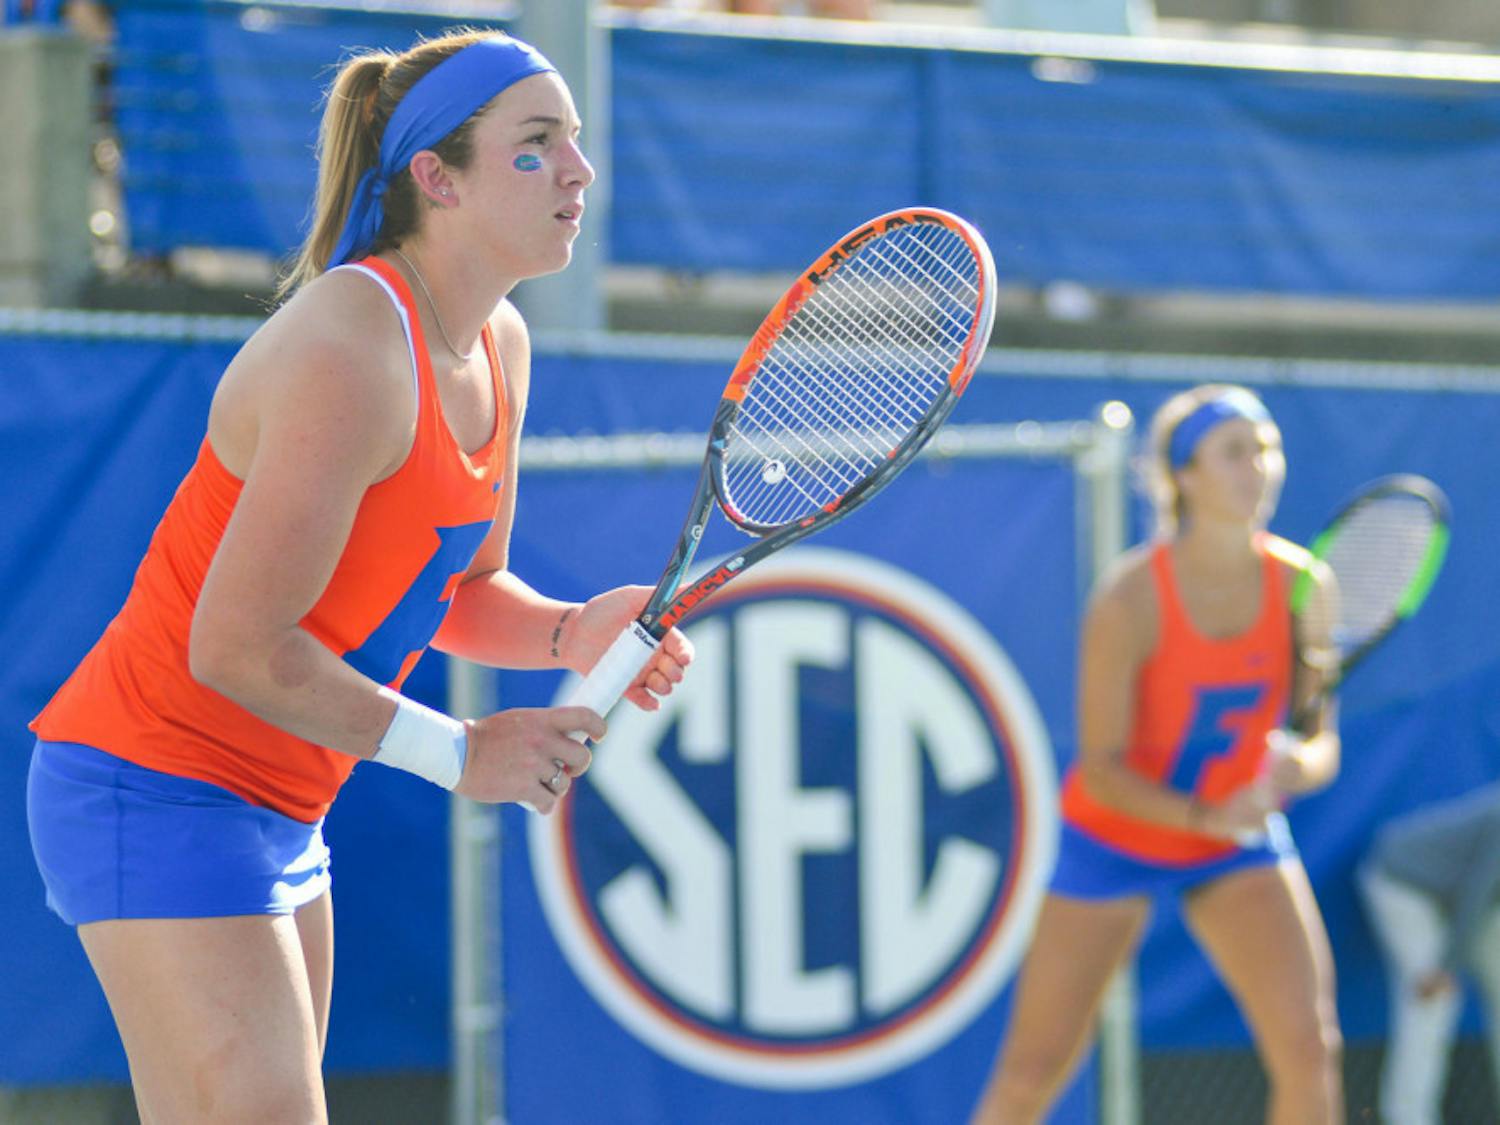 Victoria Emma (pictured) was paired with&nbsp;sophomore Katie Kubicz in place of the injured McCartney Kessler in Florida's 1-4 loss to Alabama on Friday.